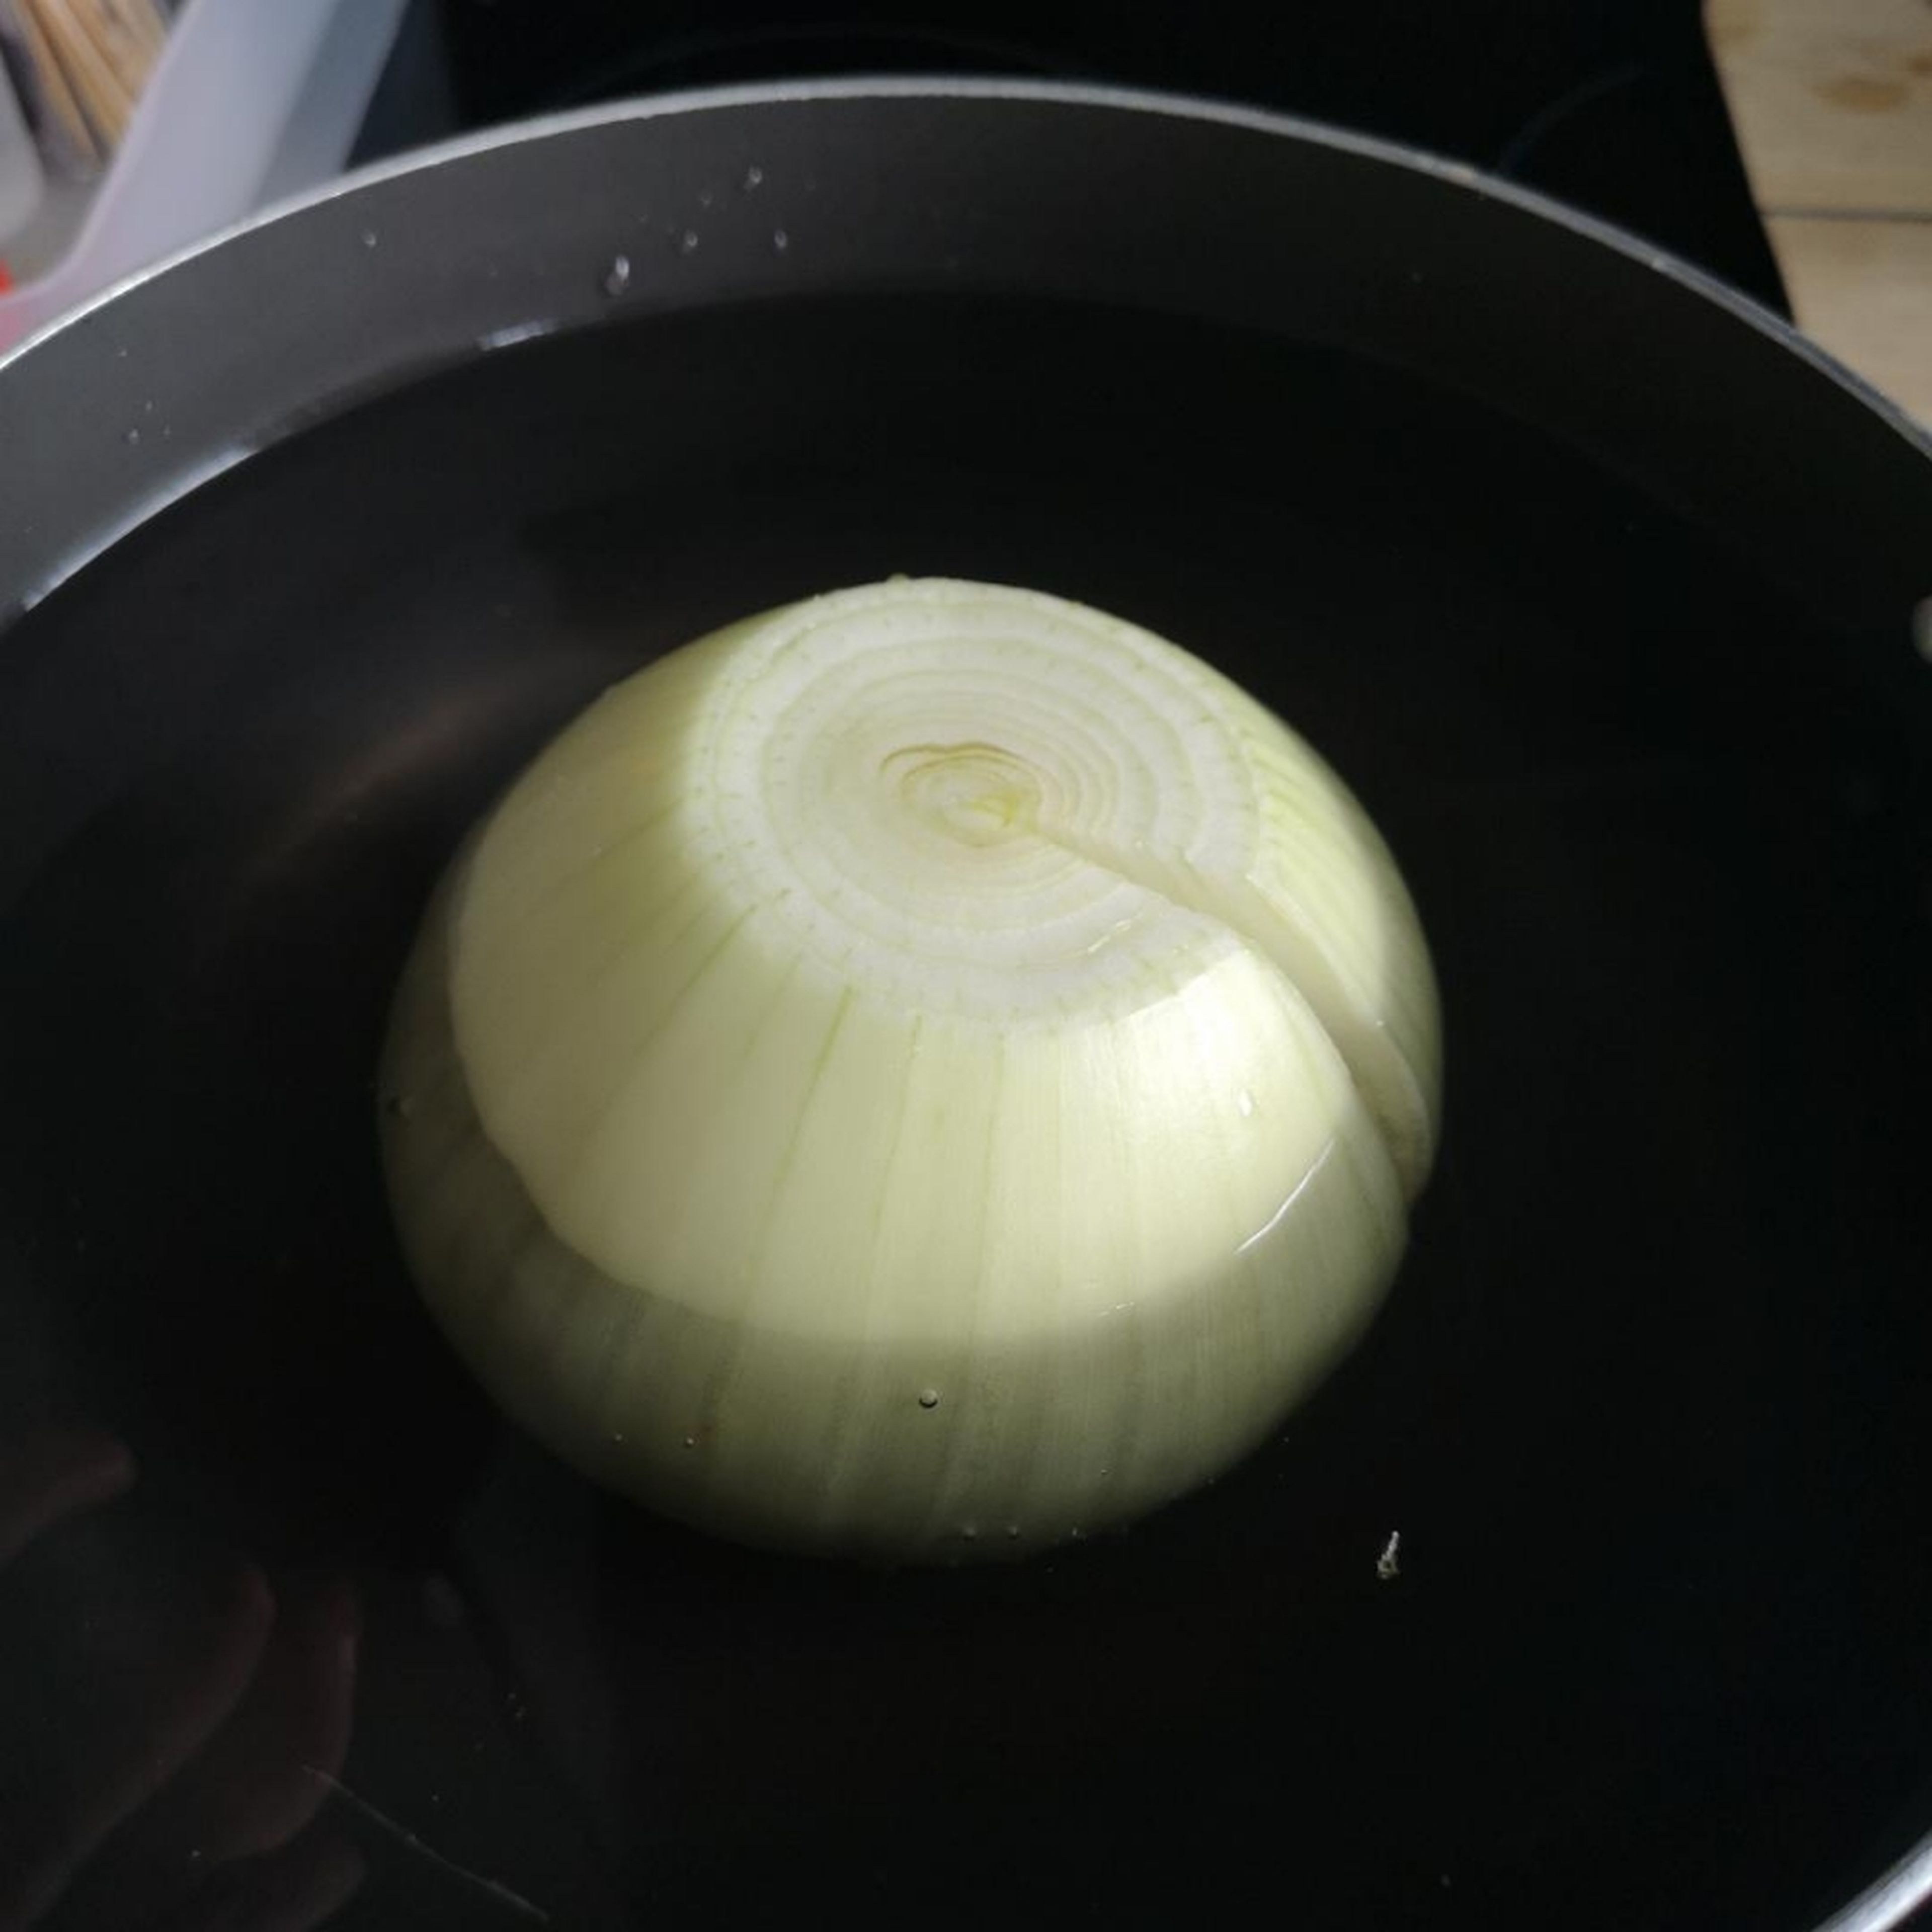 In a pot, cover the onions with cold water, and heat till you bring it to a boil, then reduce the heat and cook for 15 minutes until the onions are cooked through. make sure you salt your water!